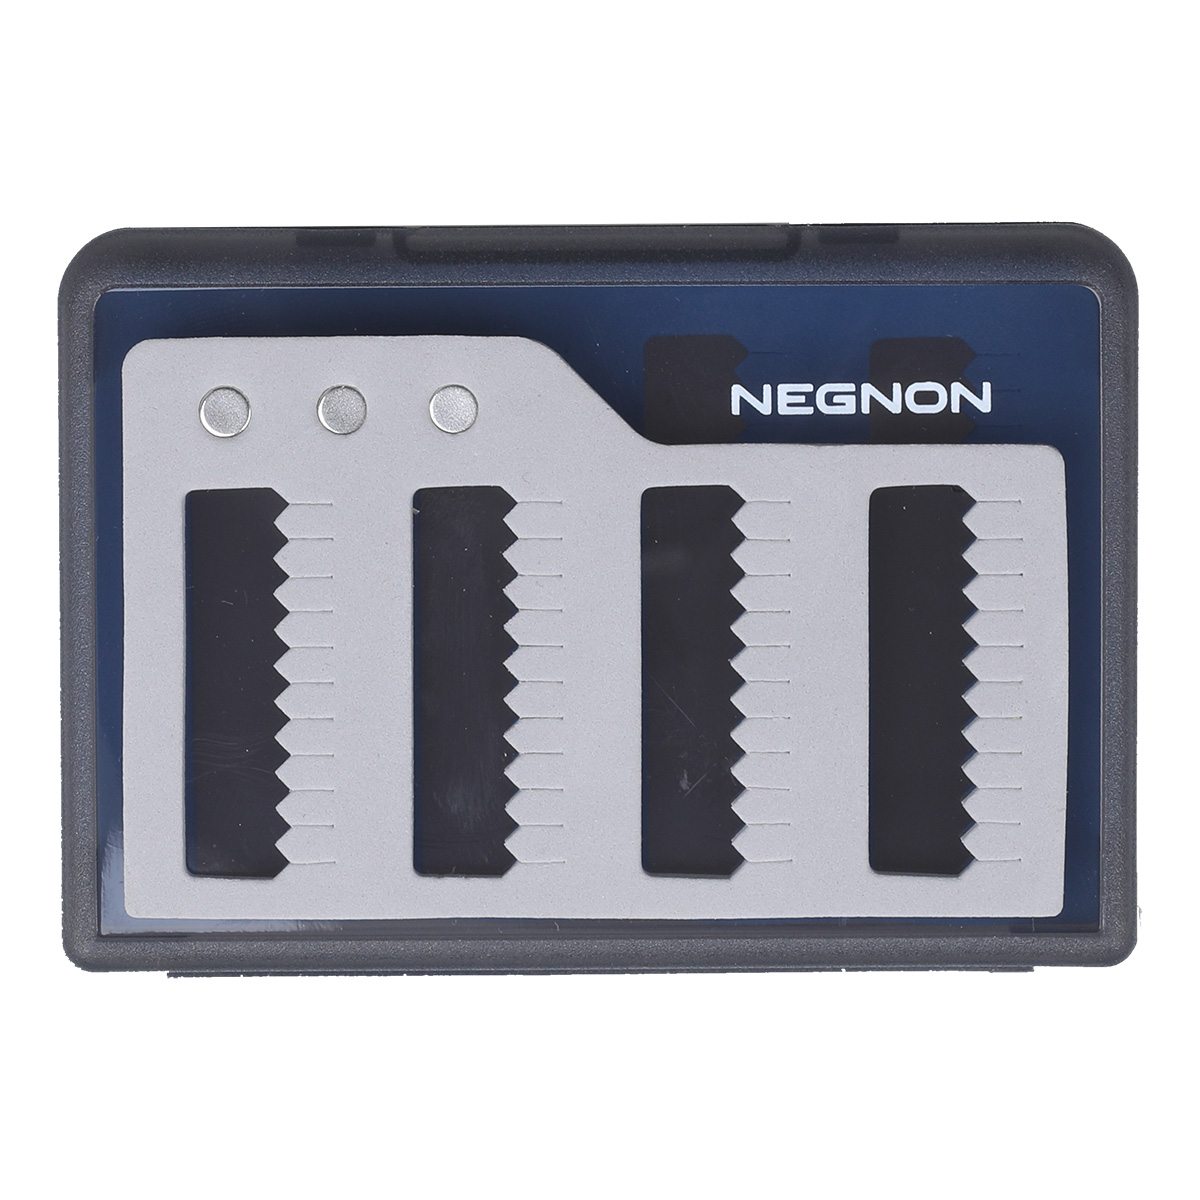 Negnon Fly Patch